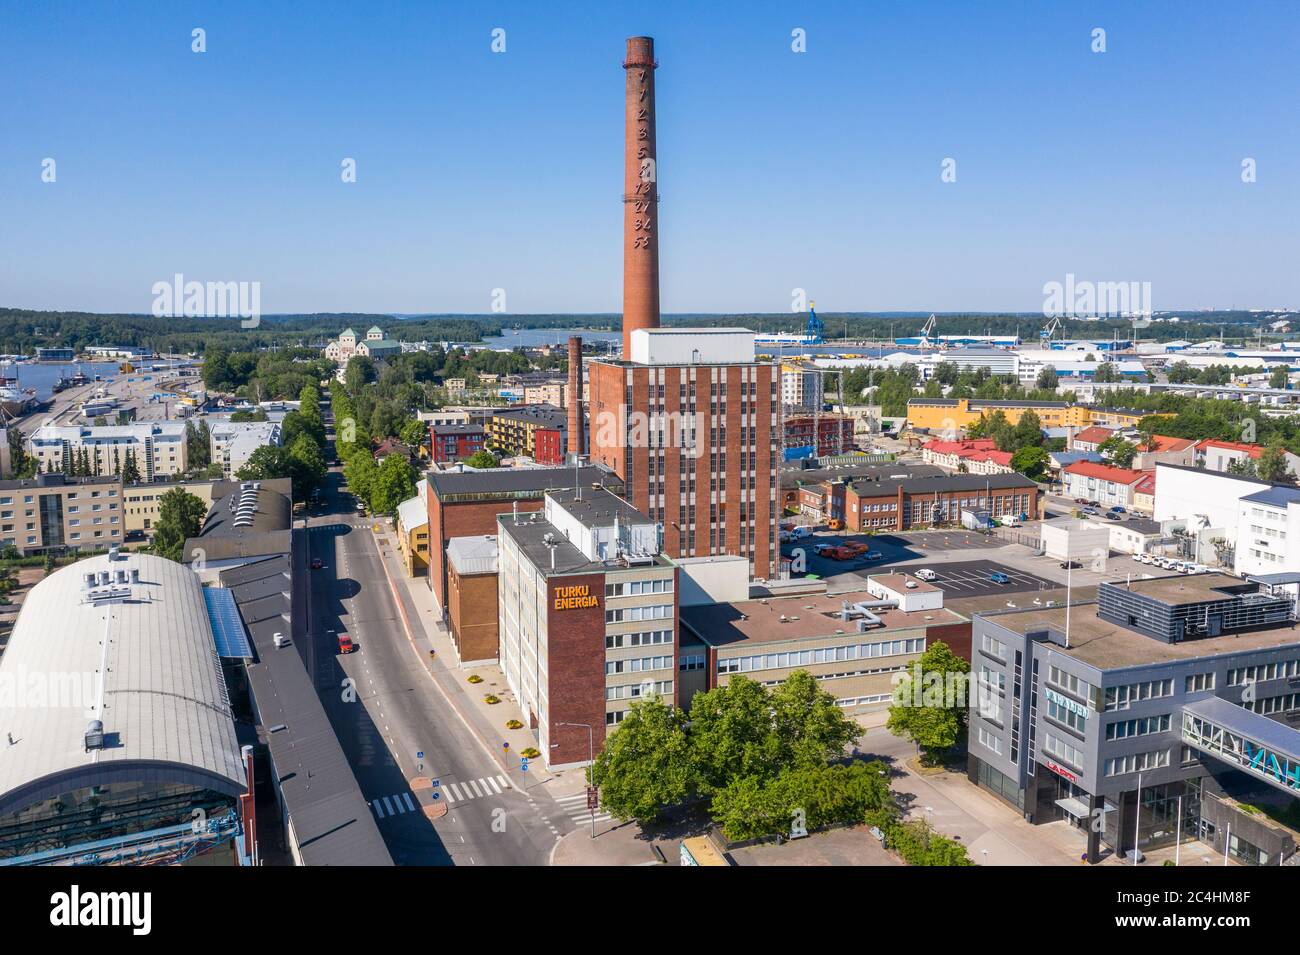 Aerial view of Turku Energia old power plant and head office in Turku, Finland in Summer Stock Photo